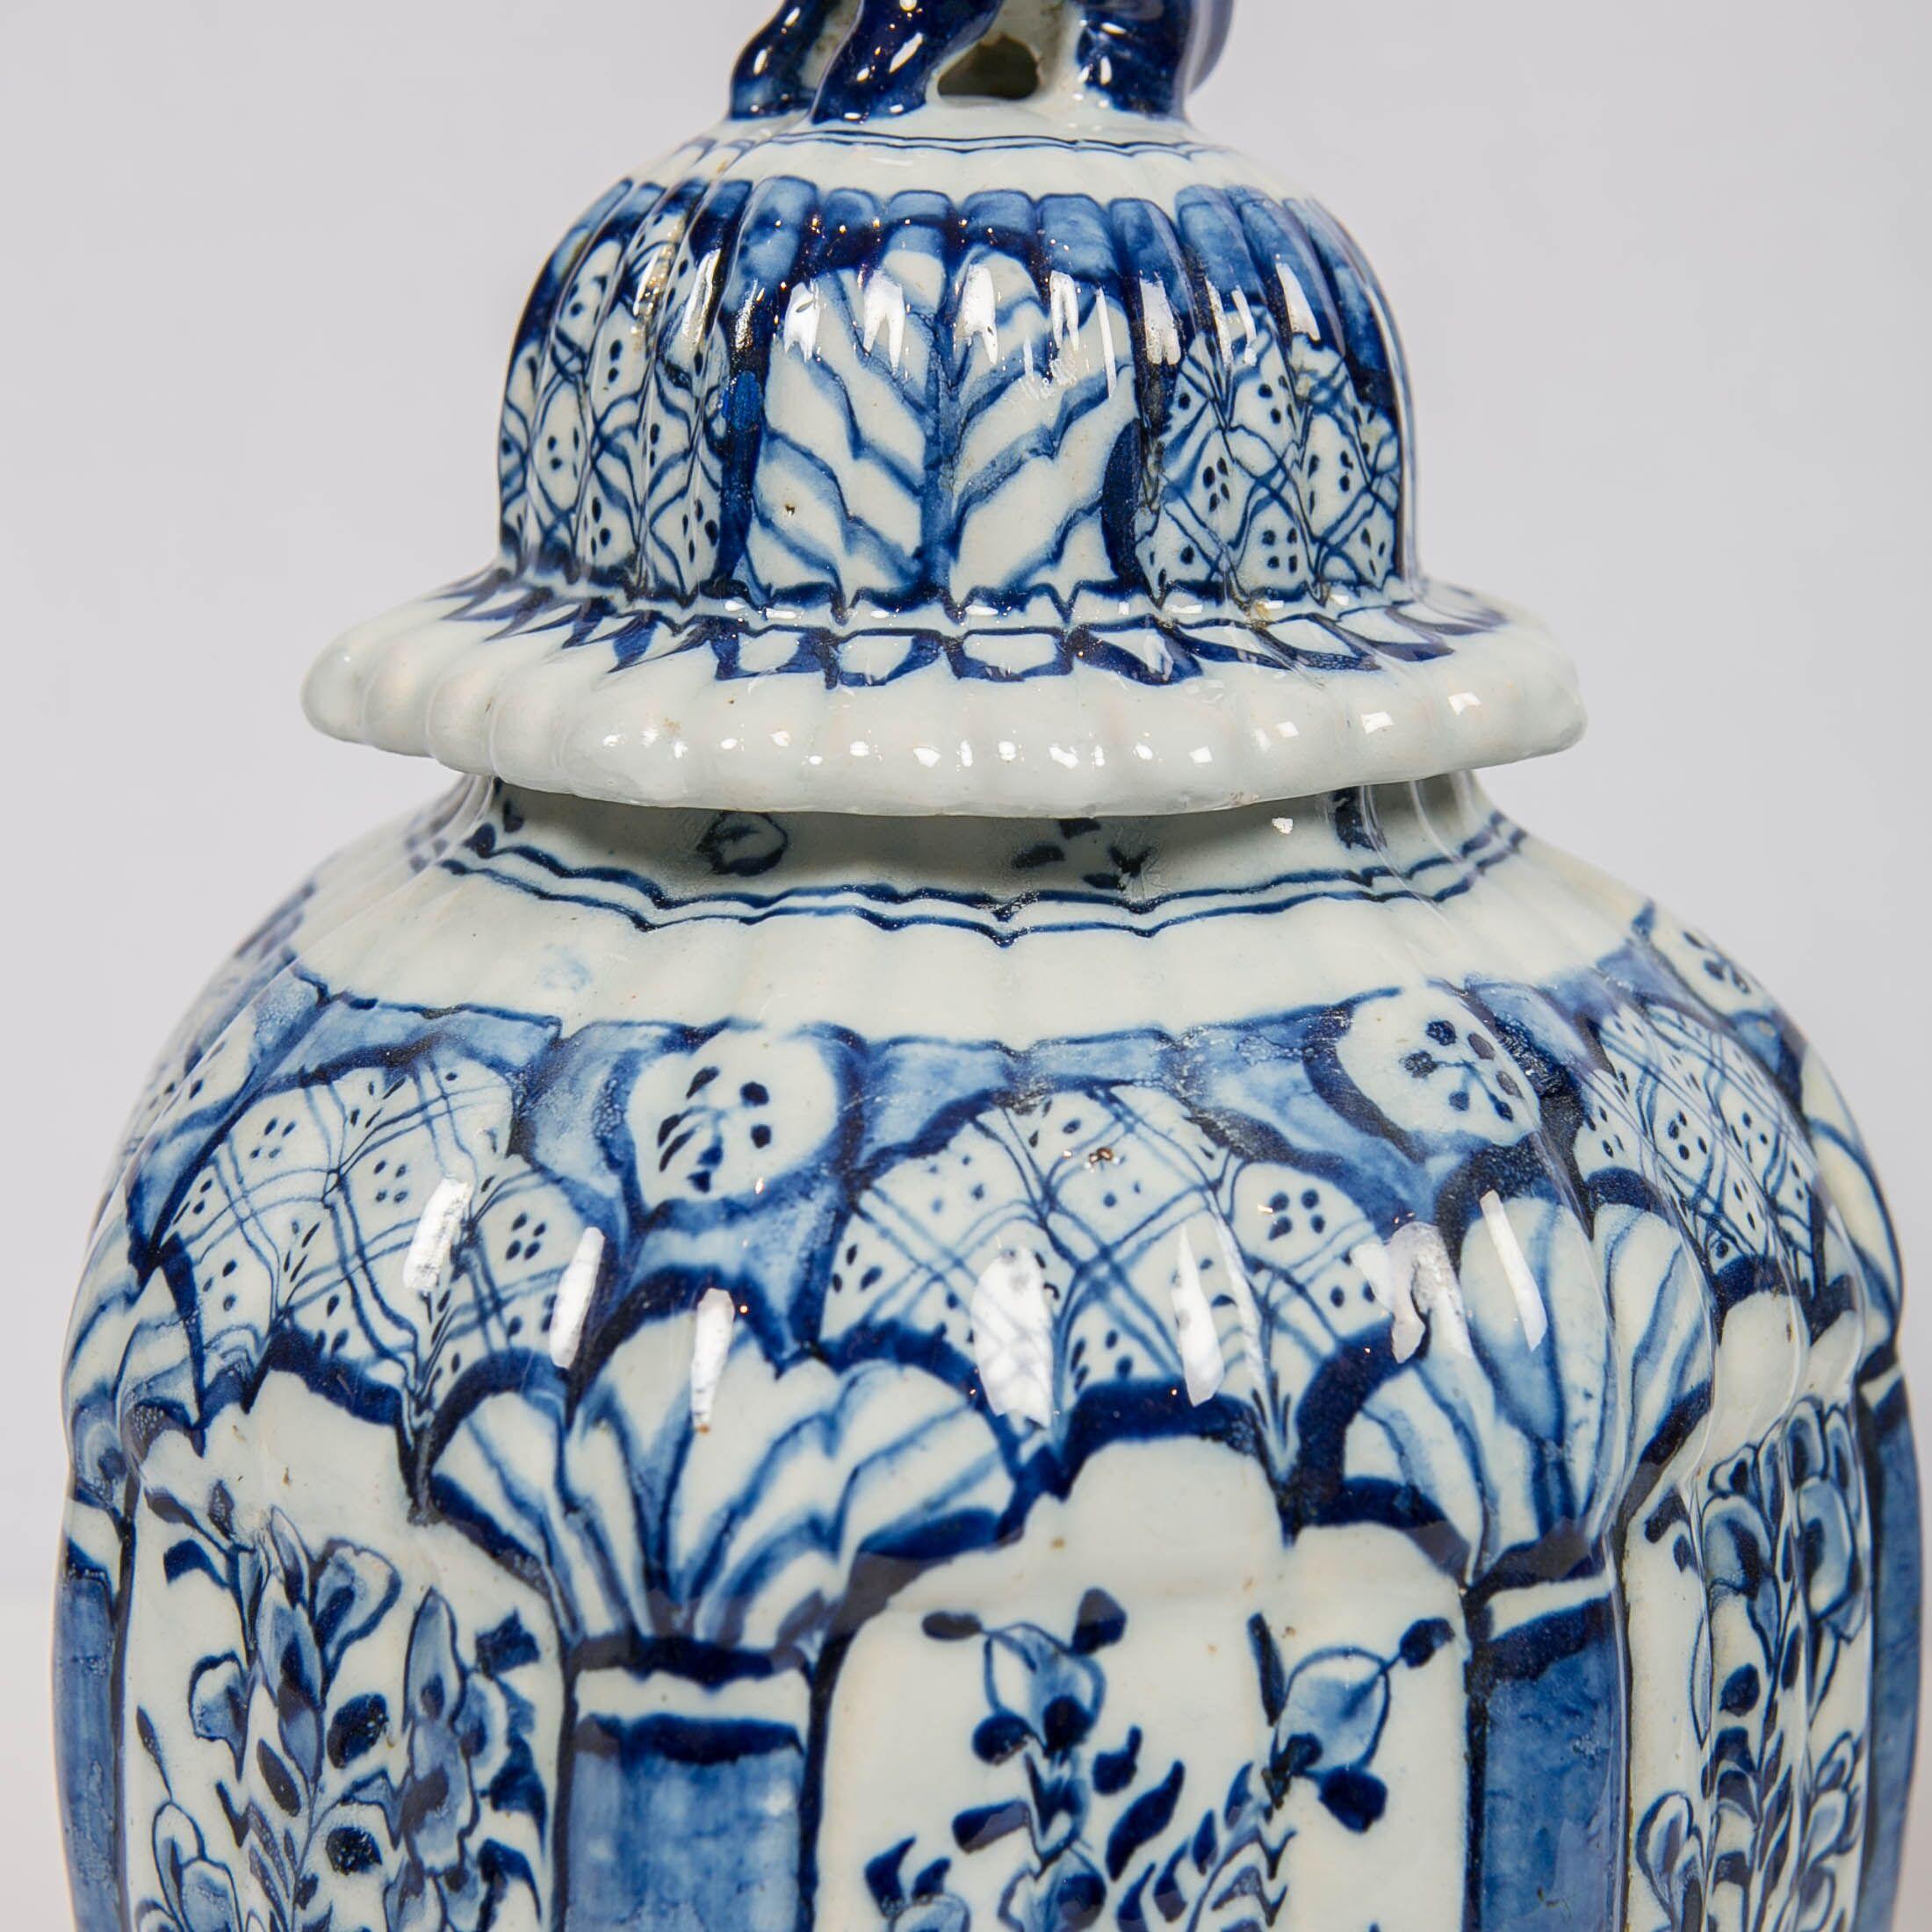 18th Century Delft Blue and White Jars with Lion Finials Made circa 1780